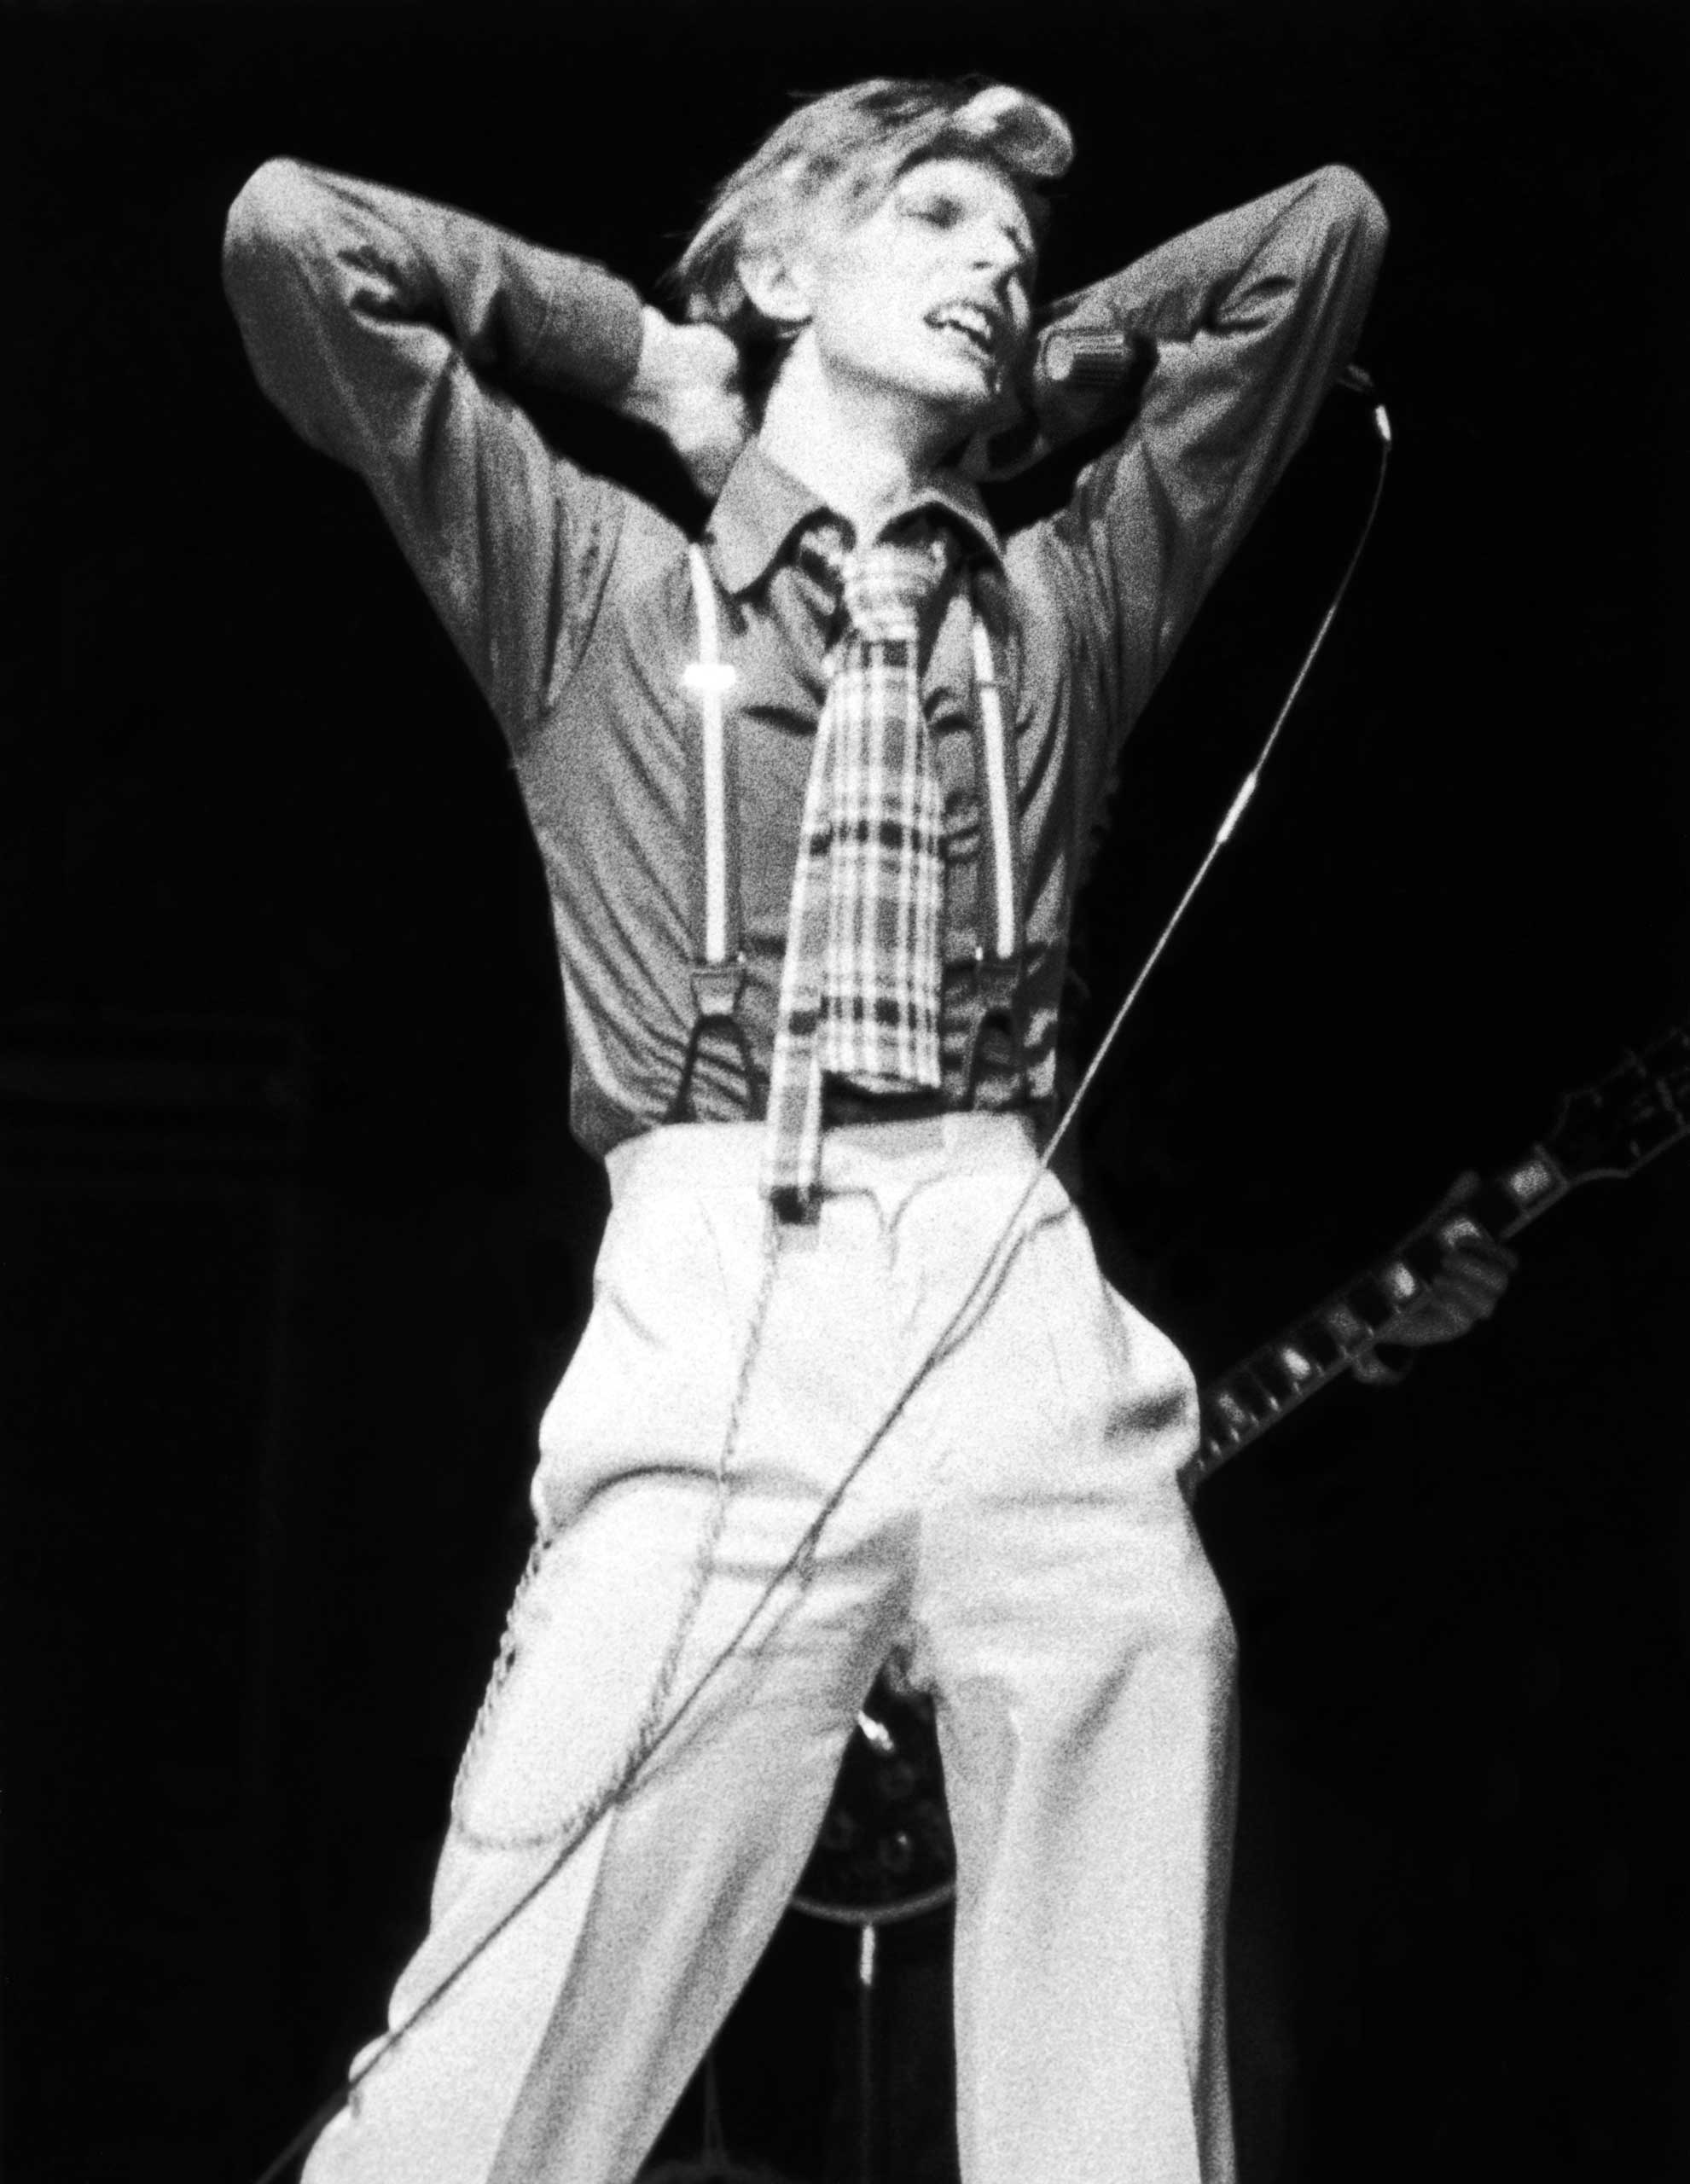 David Bowie performing on stage at Radio City Music Hall, NYC. 1974.